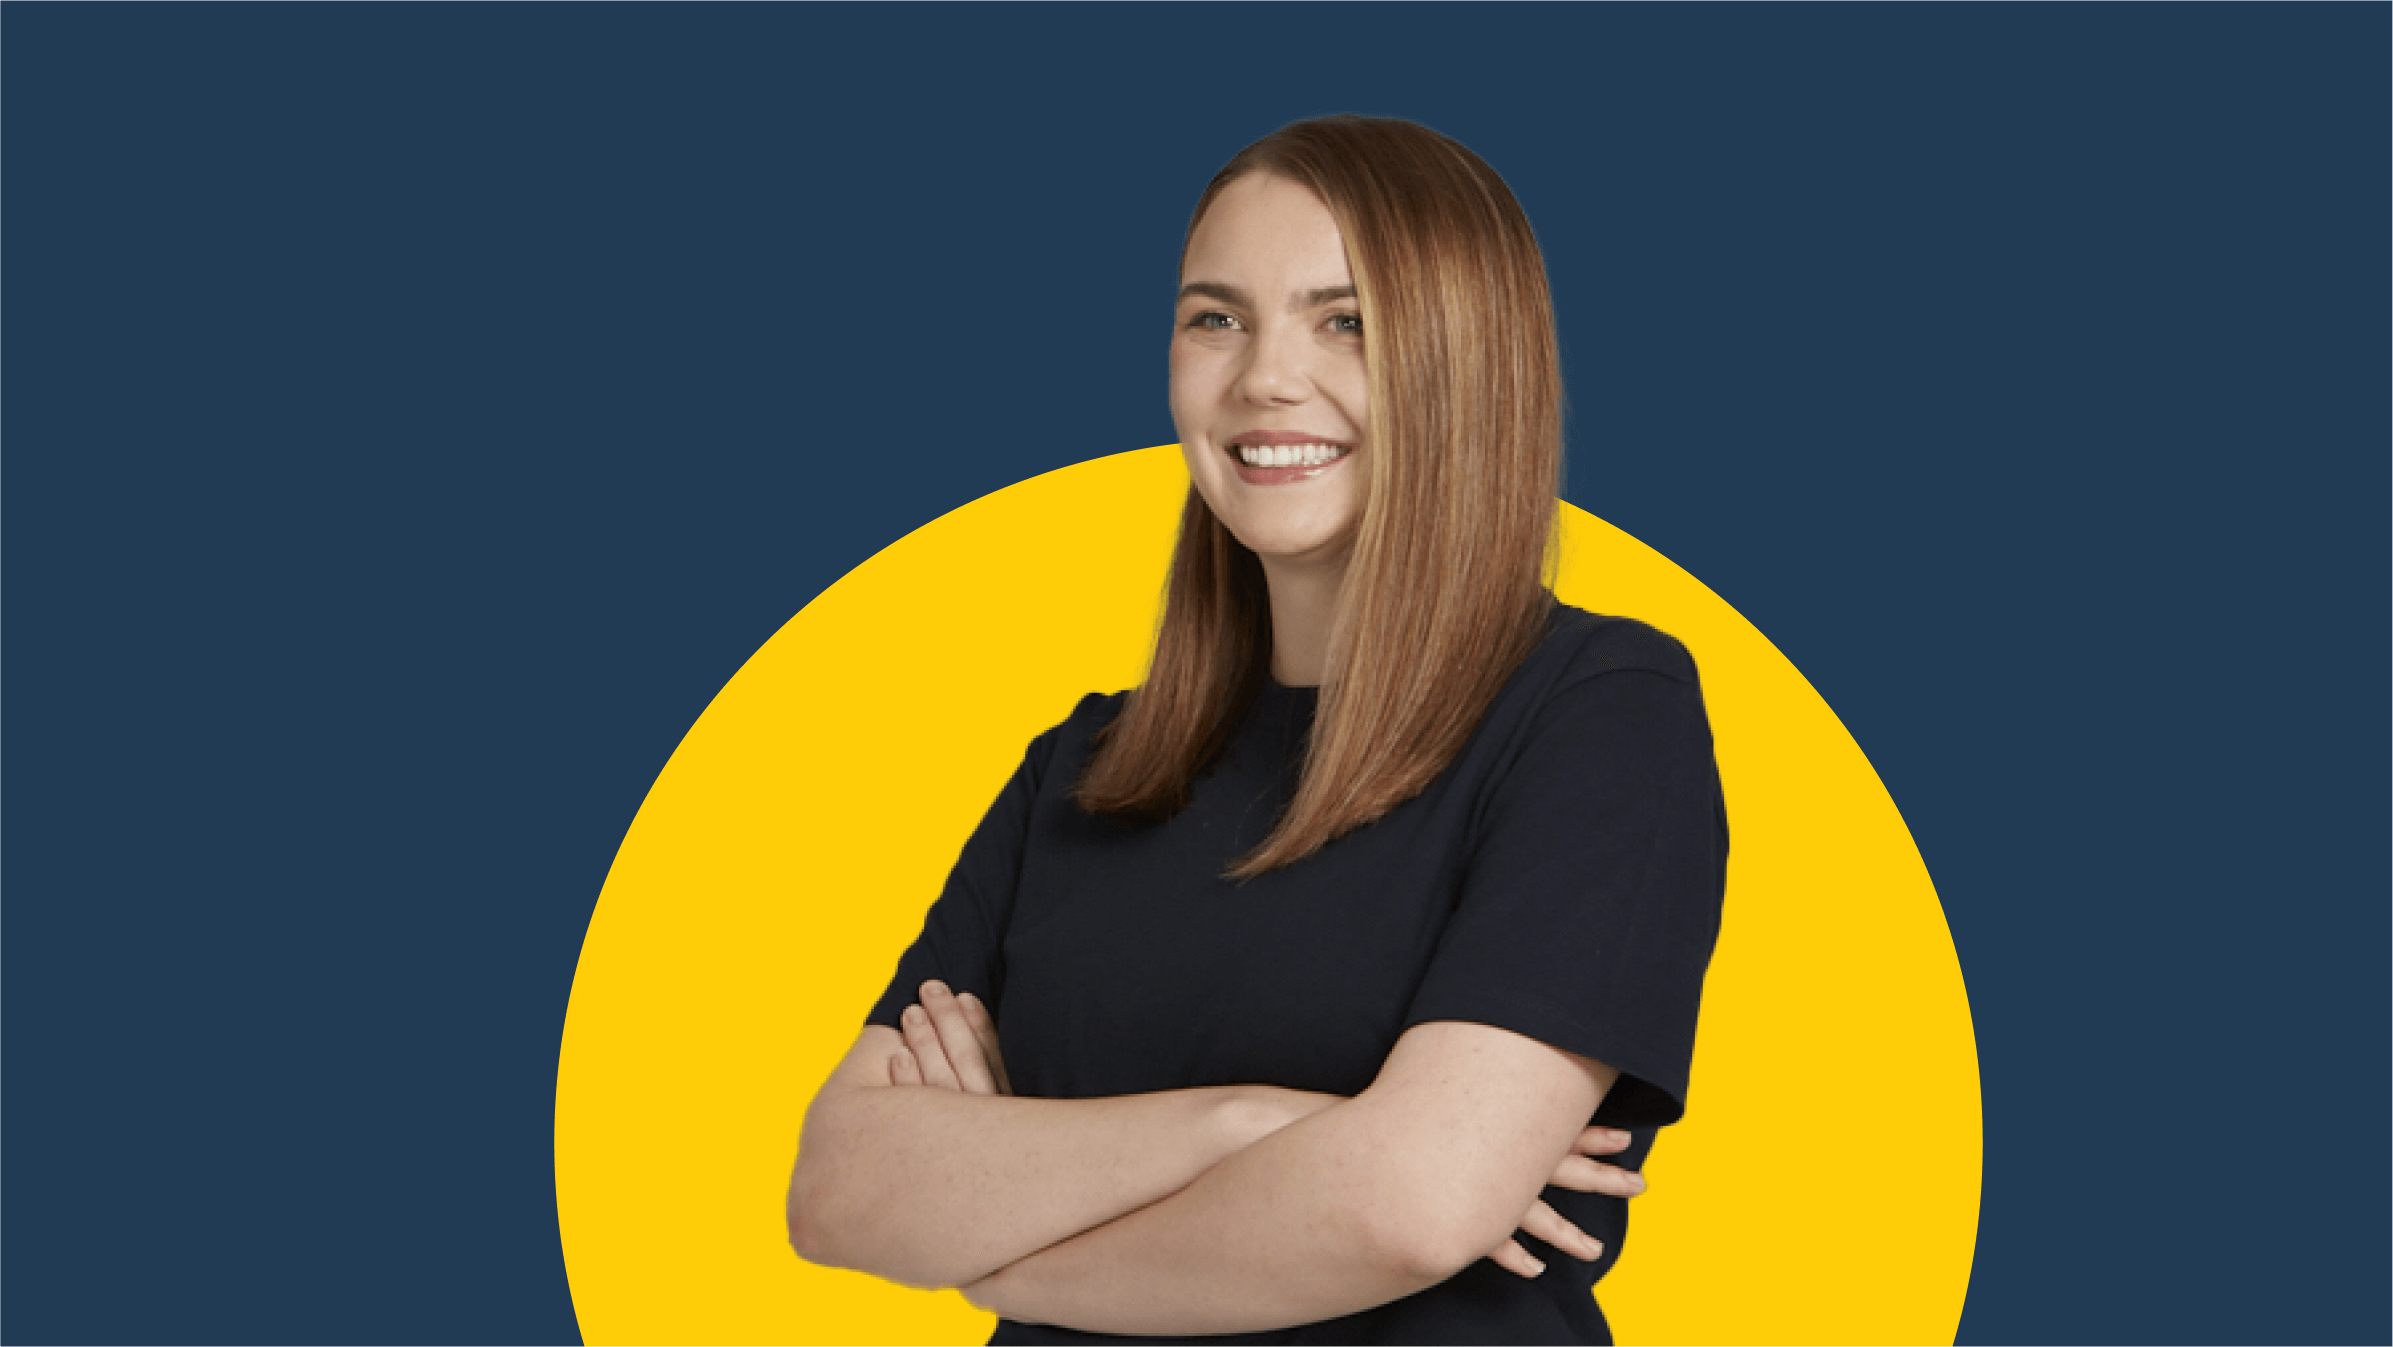 Xero partner consultant Casey-Jane Aldous-Ball smiling with arms folded against a blue background.